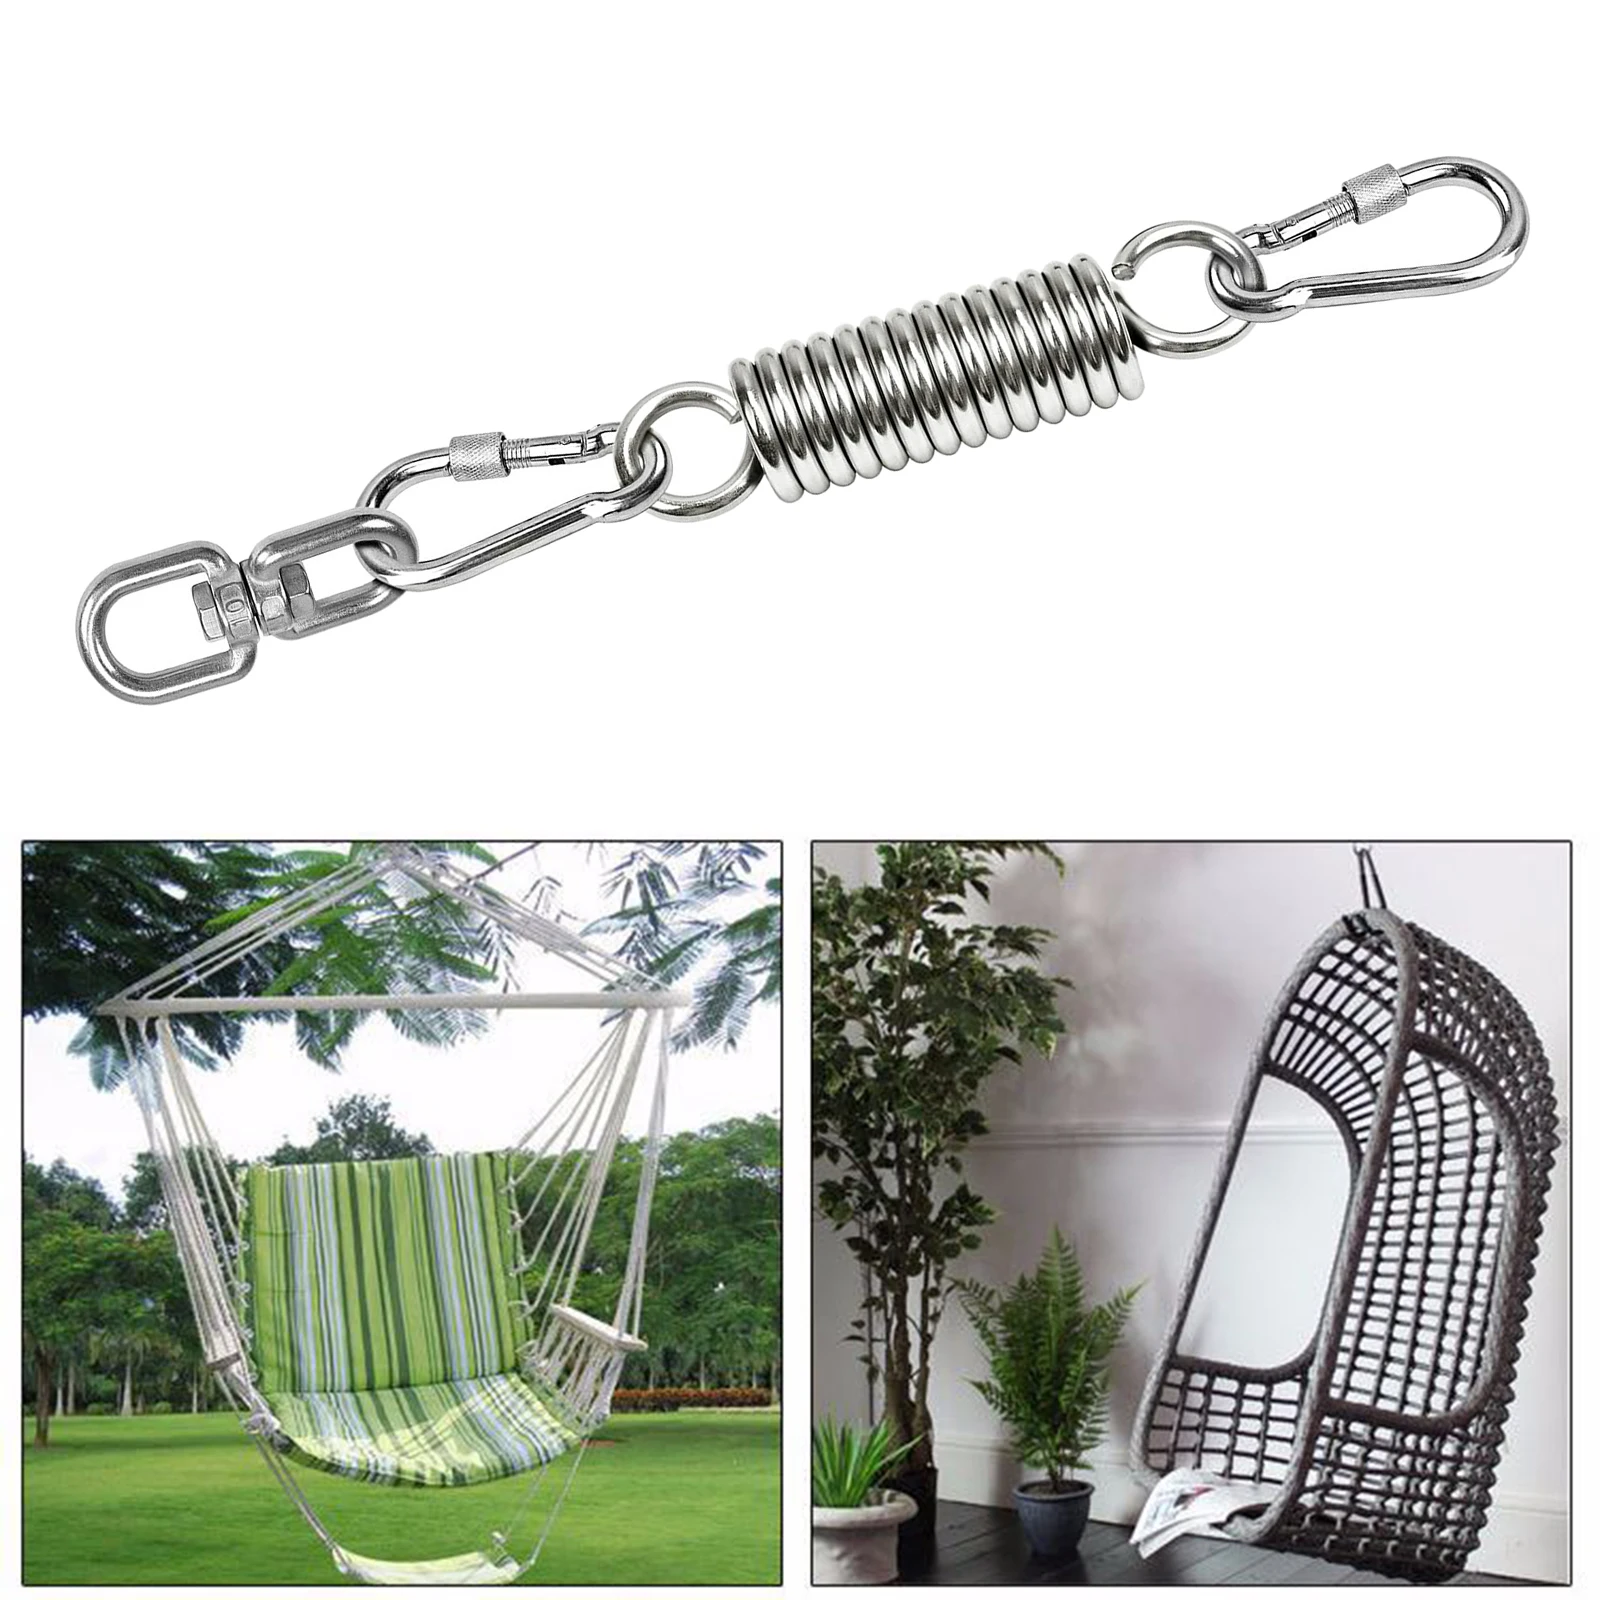 Porch Suspension Hammock Chair Spring with 2 Carabiner Hooks 500 LB Capacity